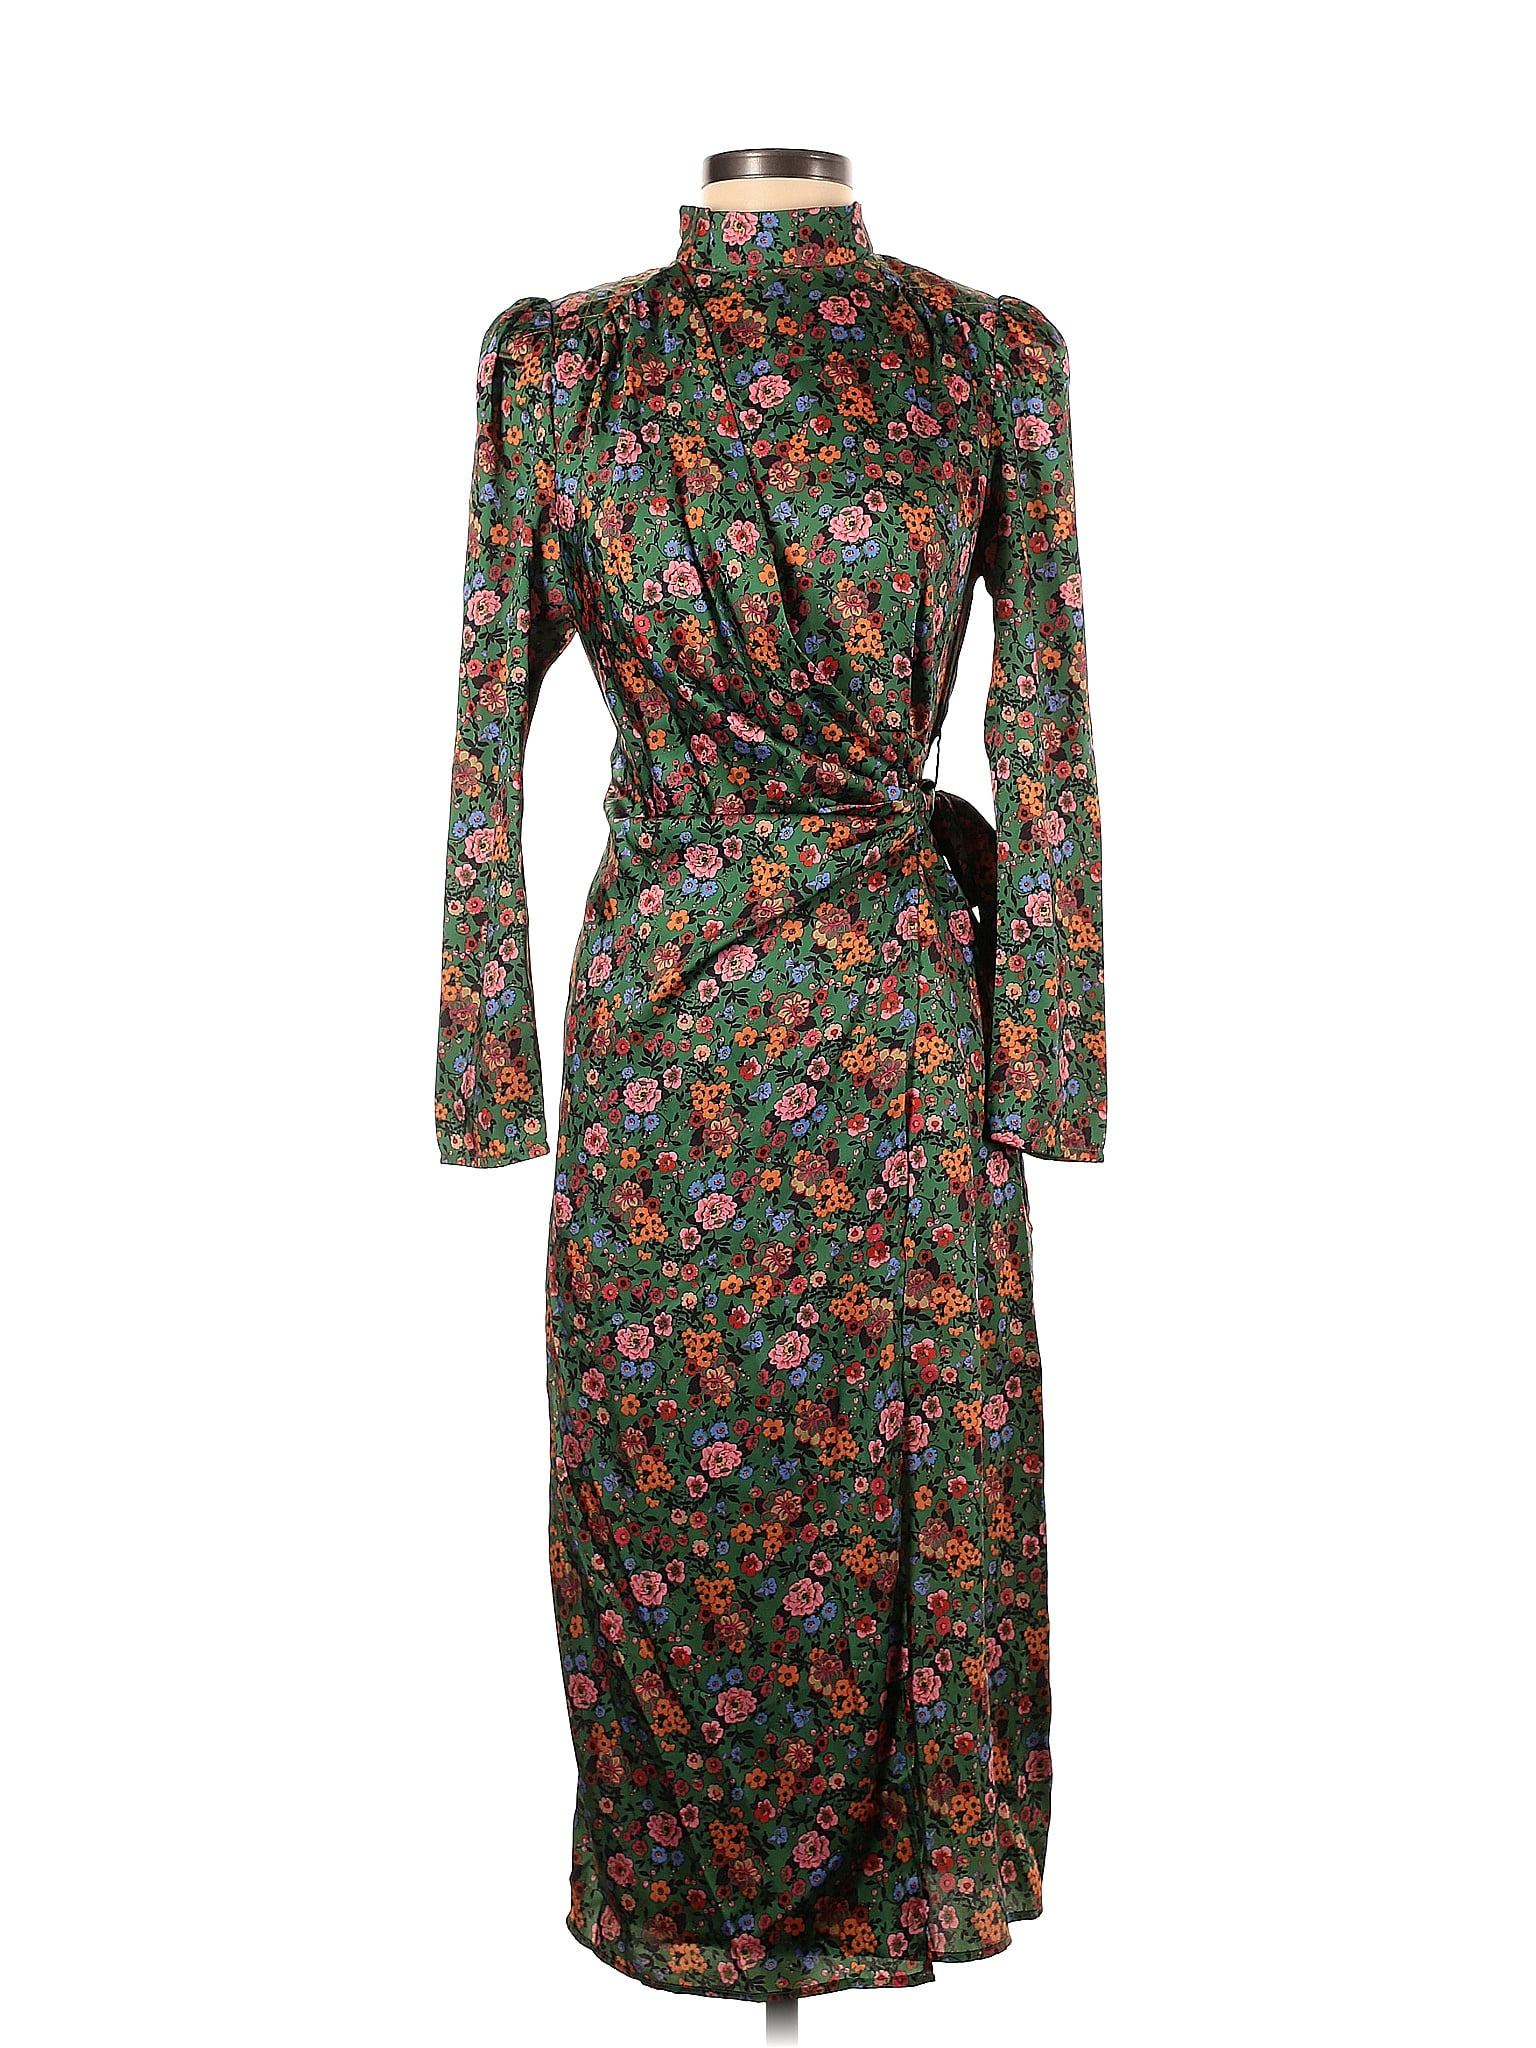 Sandro Floral Multi Color Green Cocktail Dress Size Sm (1) - 77% off ...